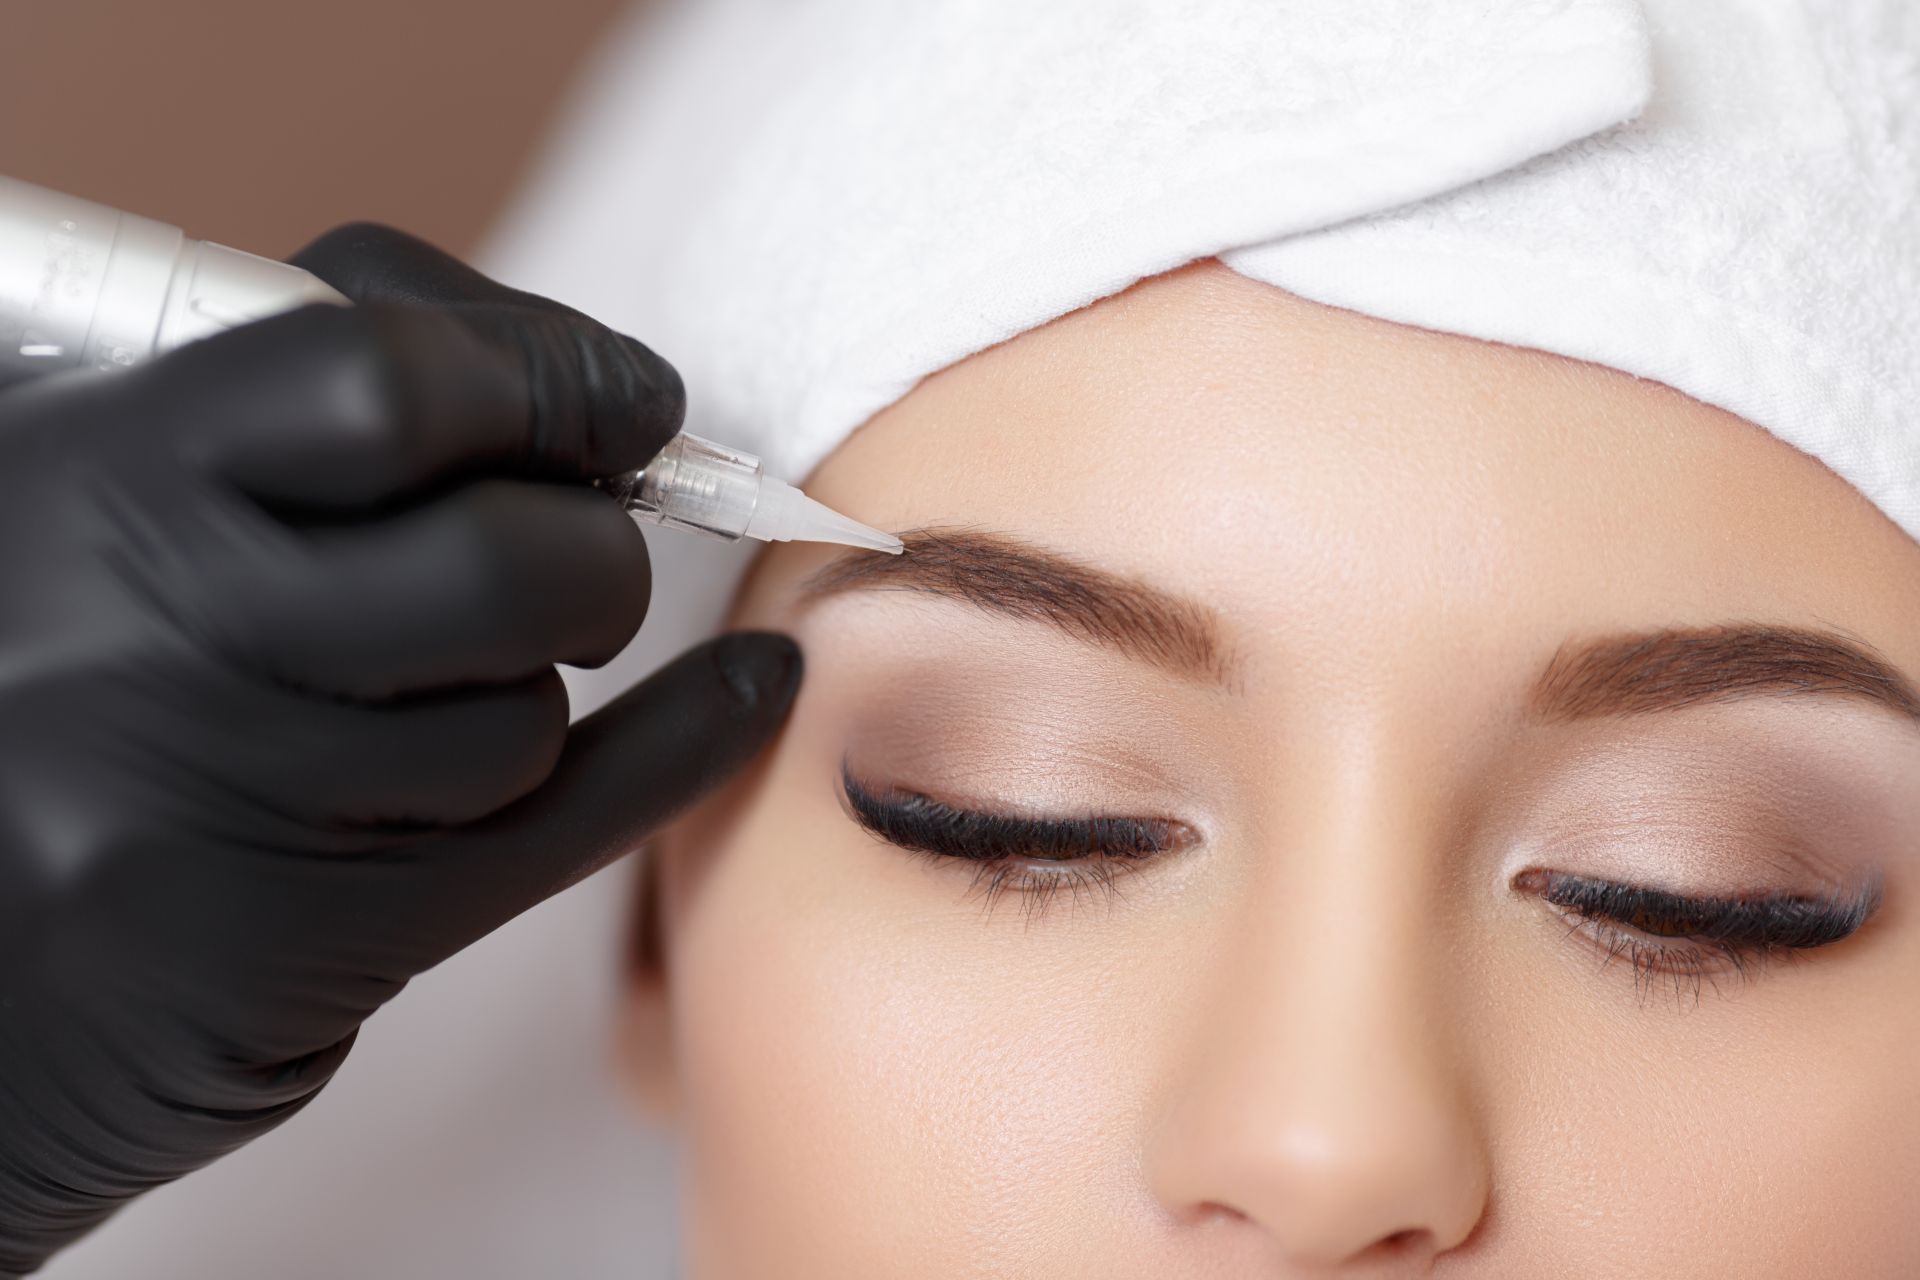 Permanent makeup. Permanent tattooing of eyebrows. Cosmetologist applying permanent make up on eyebrows- eyebrow tattoo